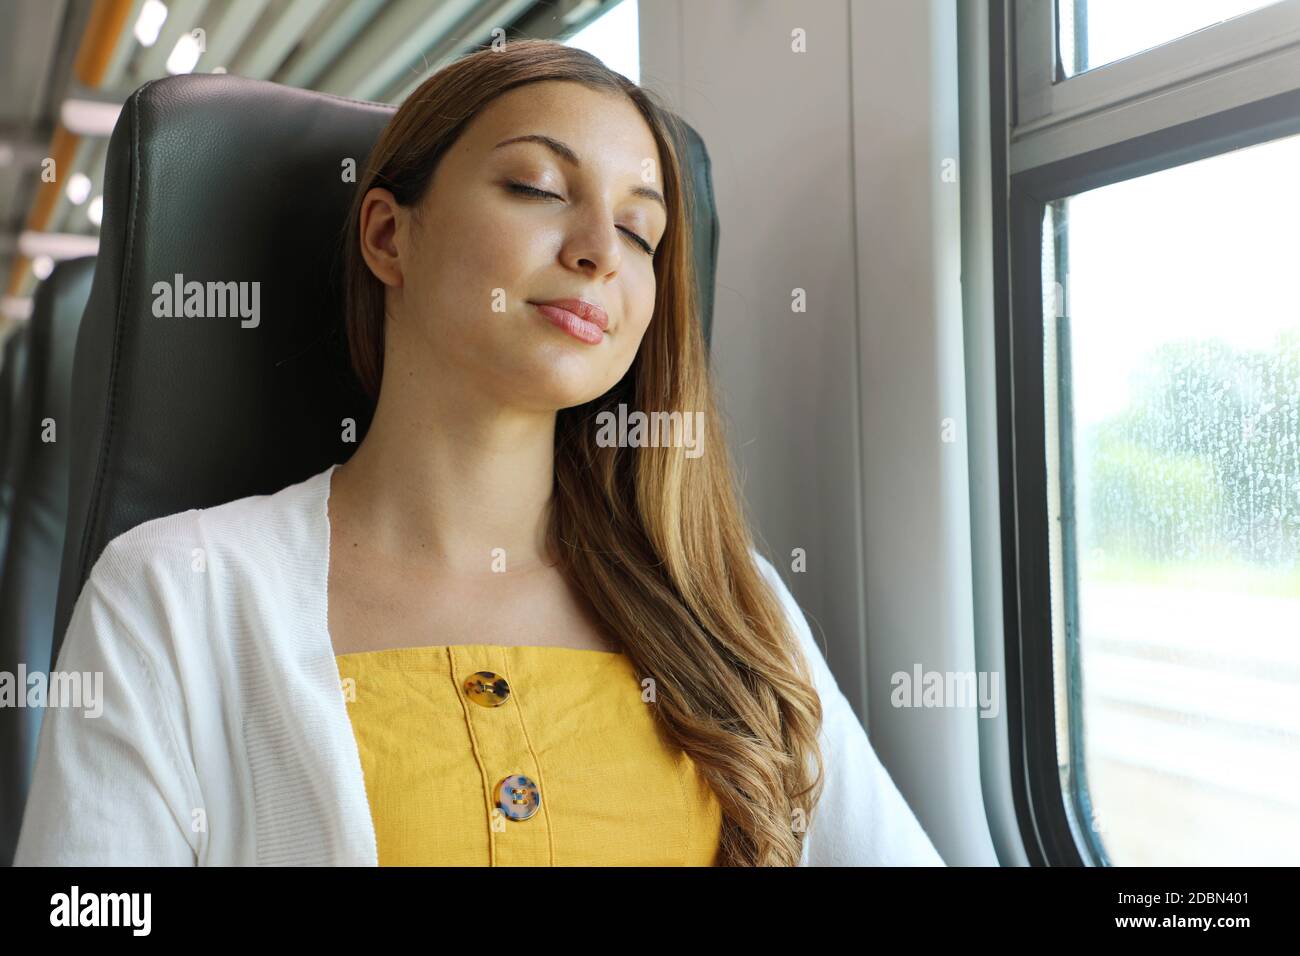 Tired business woman sleeping sitting in the train after a day of work . Train passenger traveling sitting relaxed and sleeping. Stock Photo